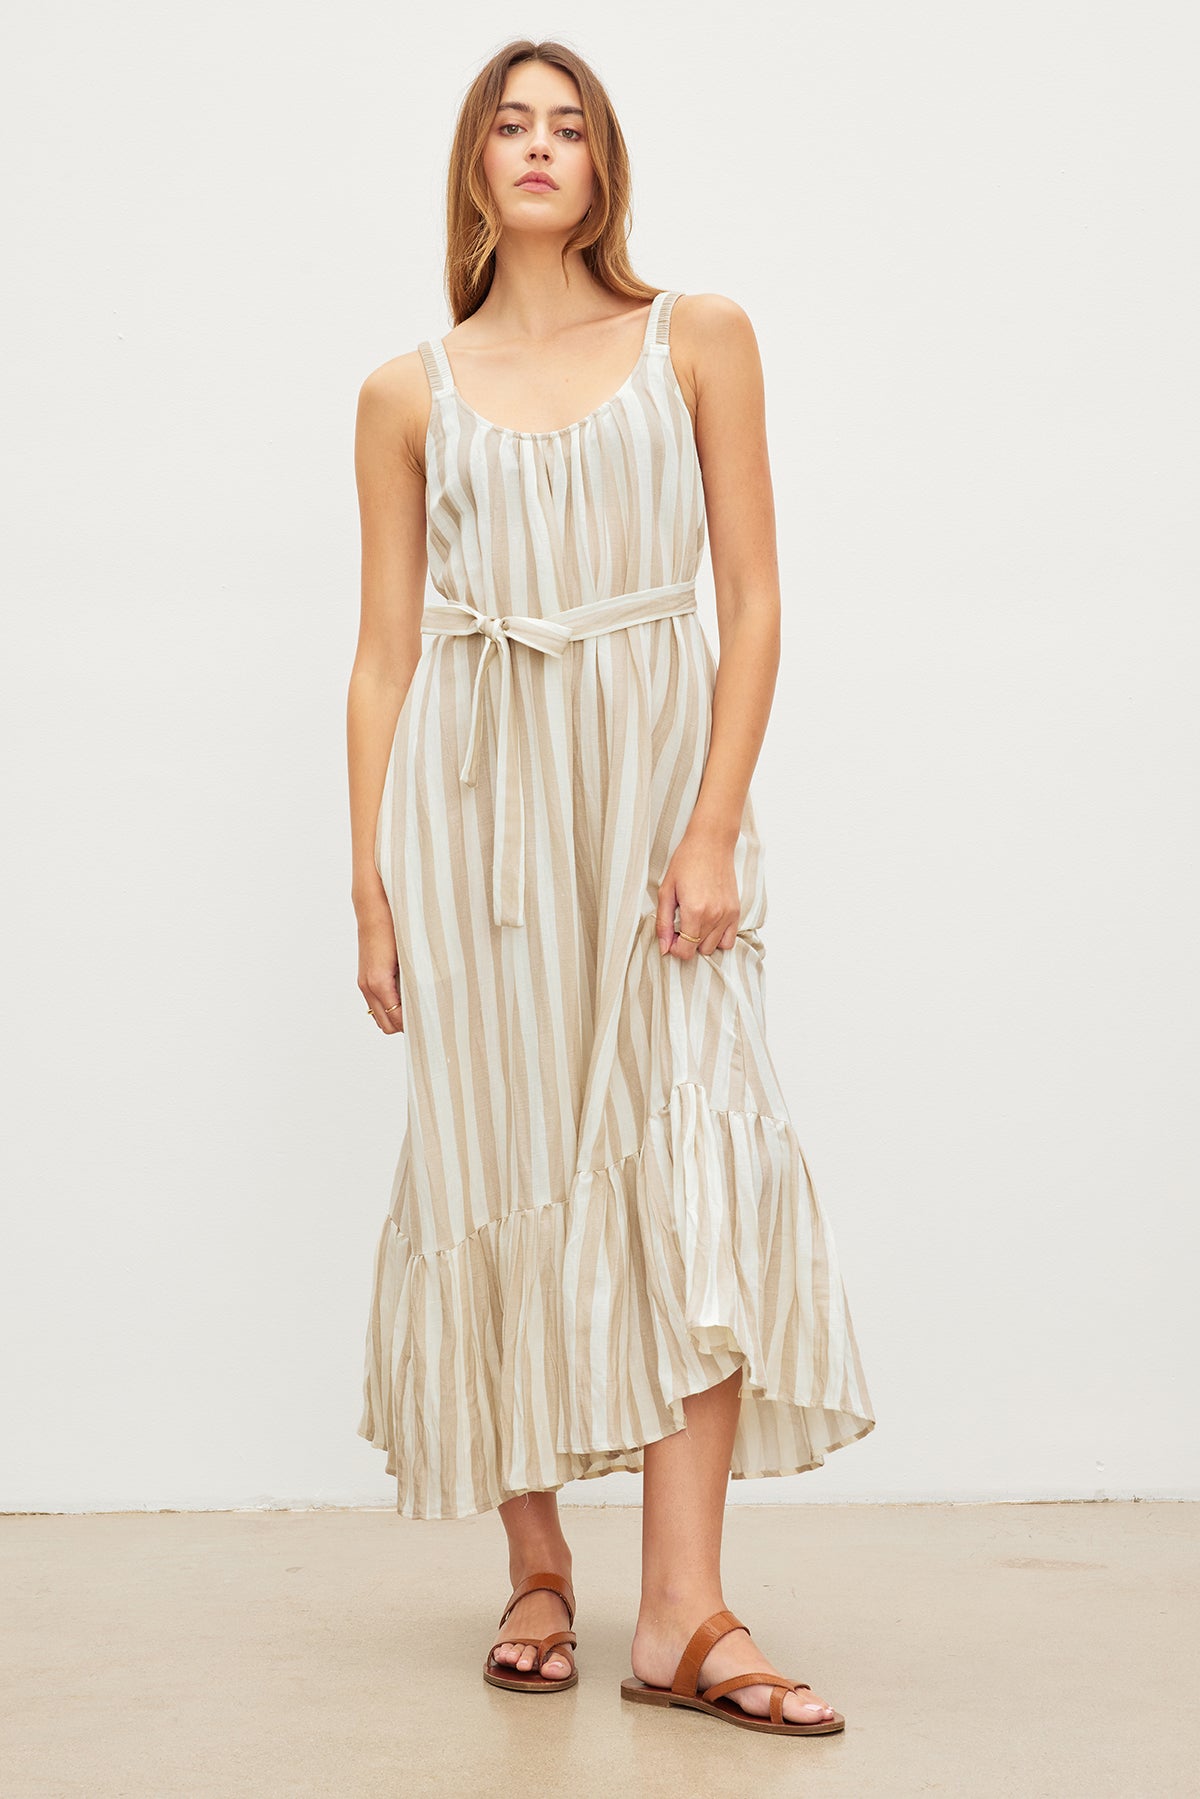 A woman stands in a studio, wearing a Velvet by Graham & Spencer MERADITH STRIPED LINEN MAXI DRESS with a belt and ruffled hem, paired with brown sandals.-35982309589185